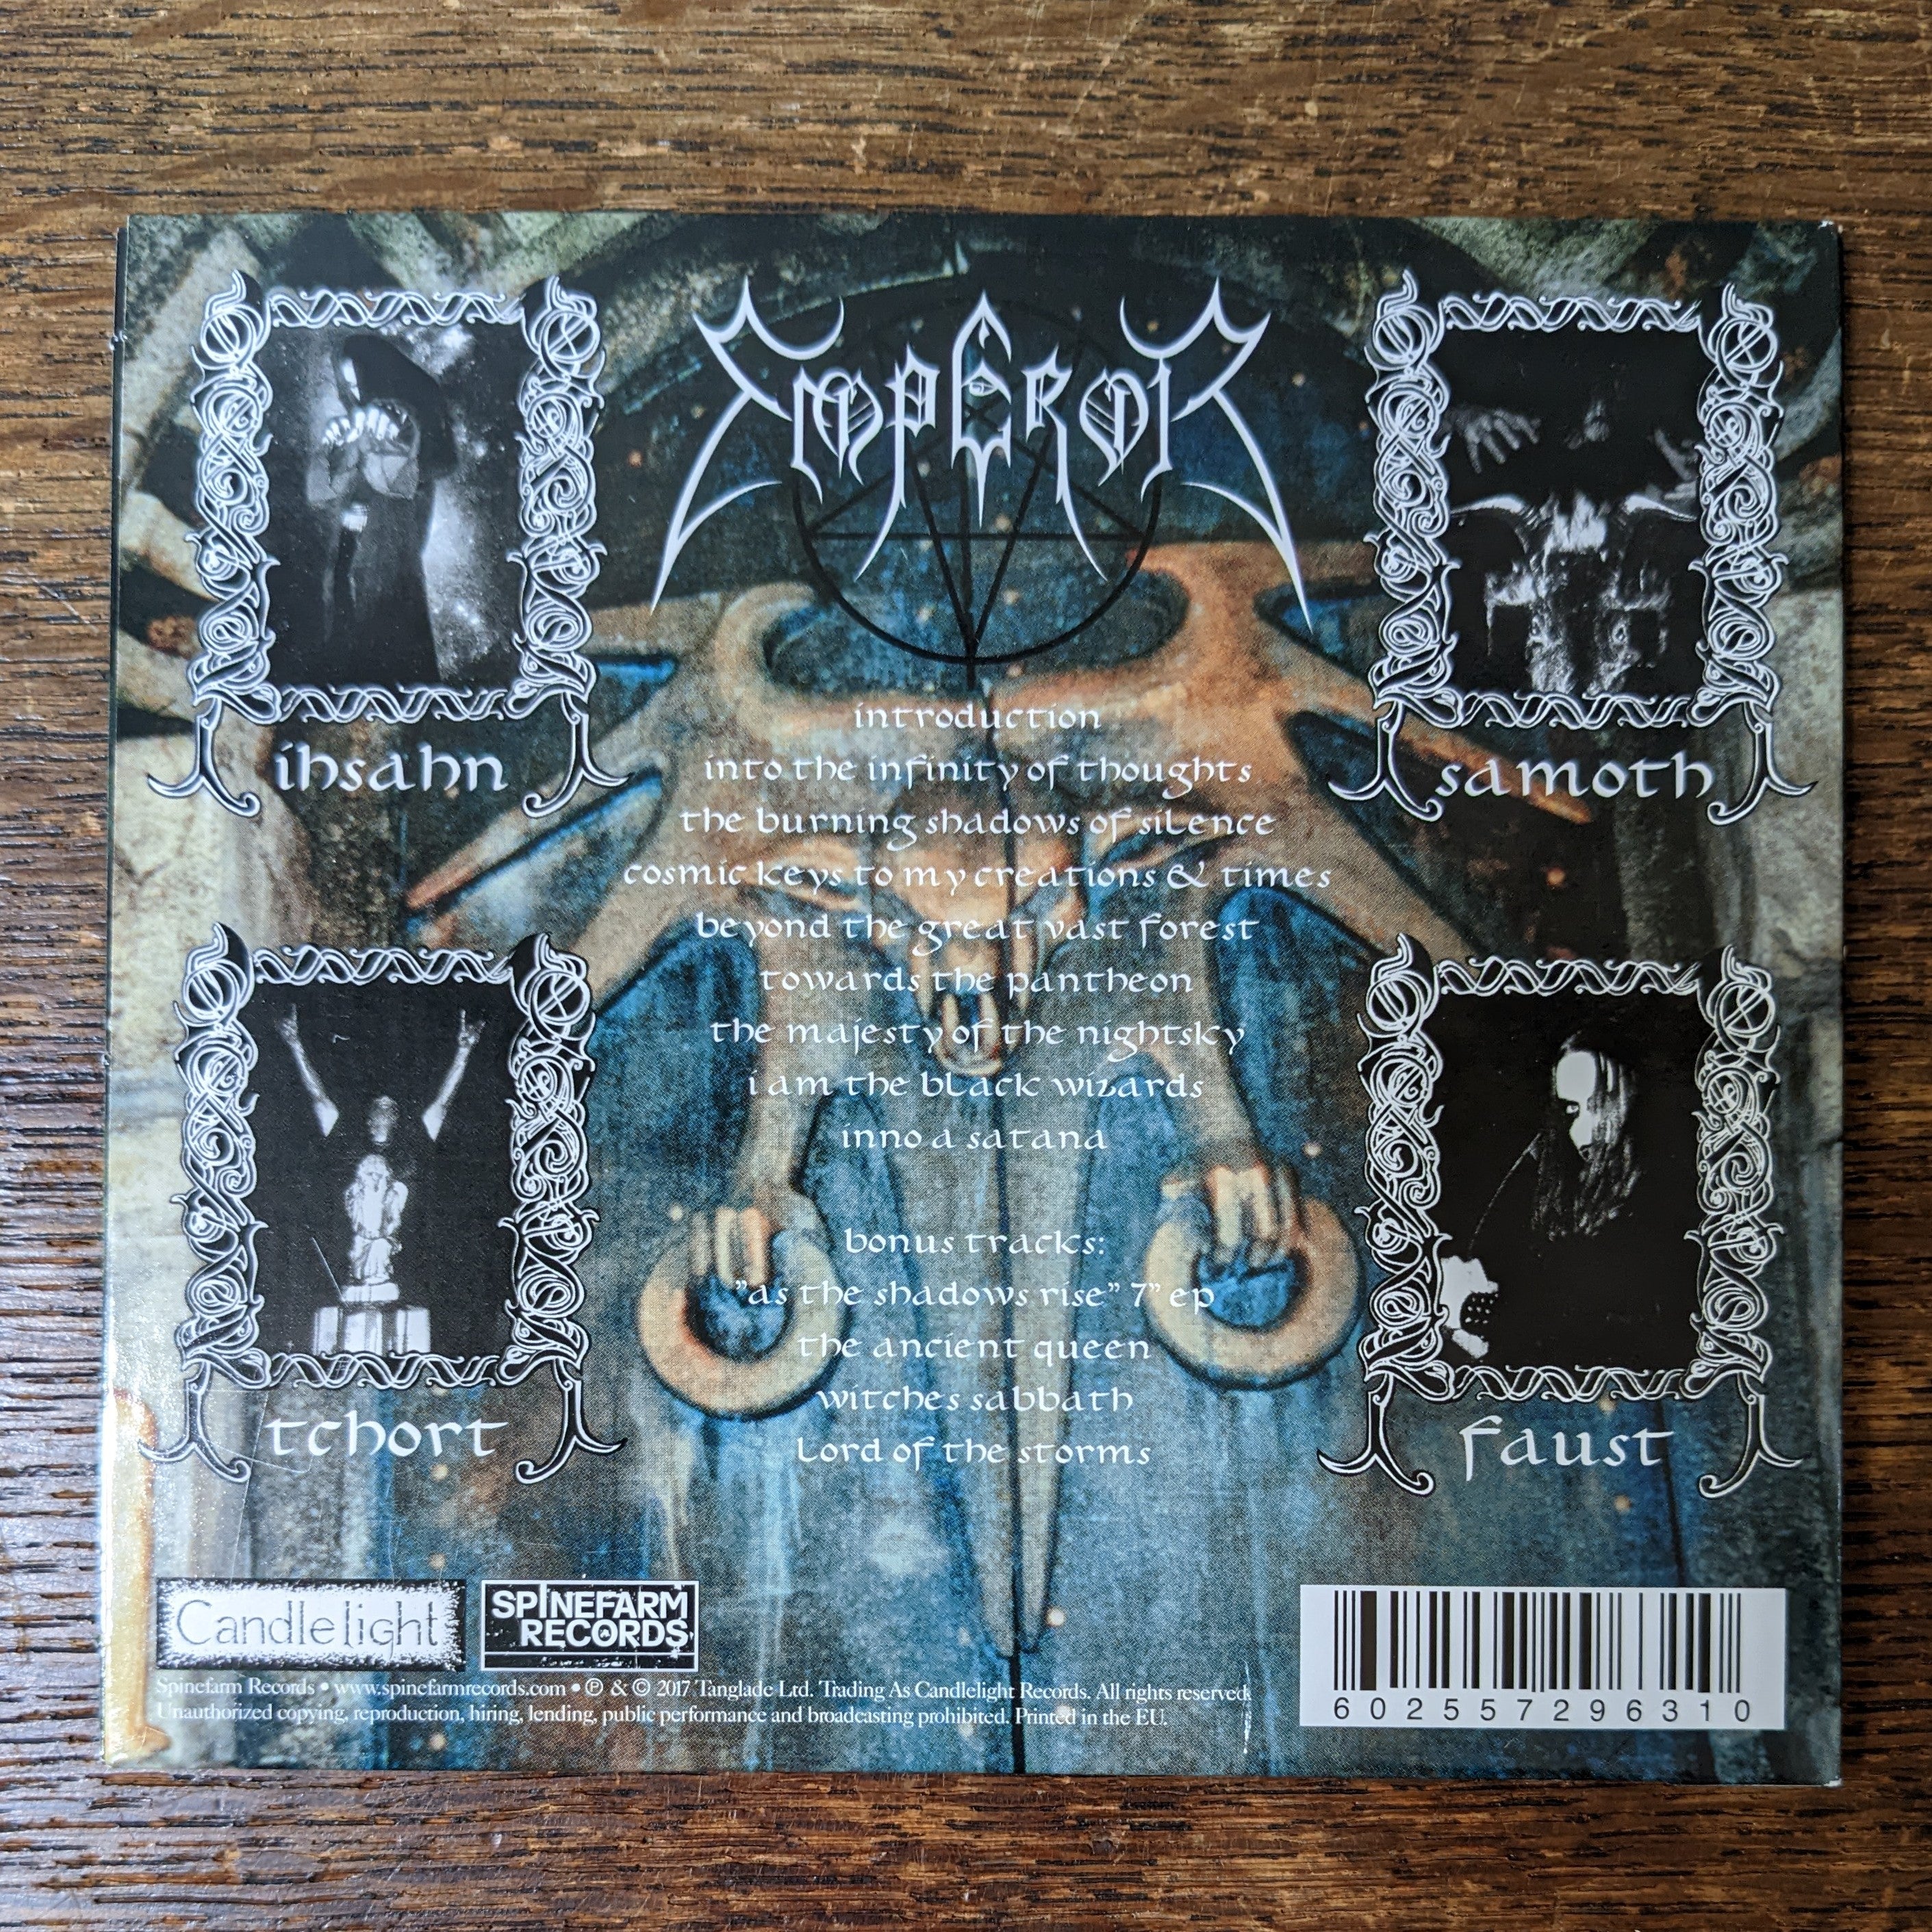 [SOLD OUT] EMPEROR In the Nightside Eclipse CD [gatefold digisleeve]